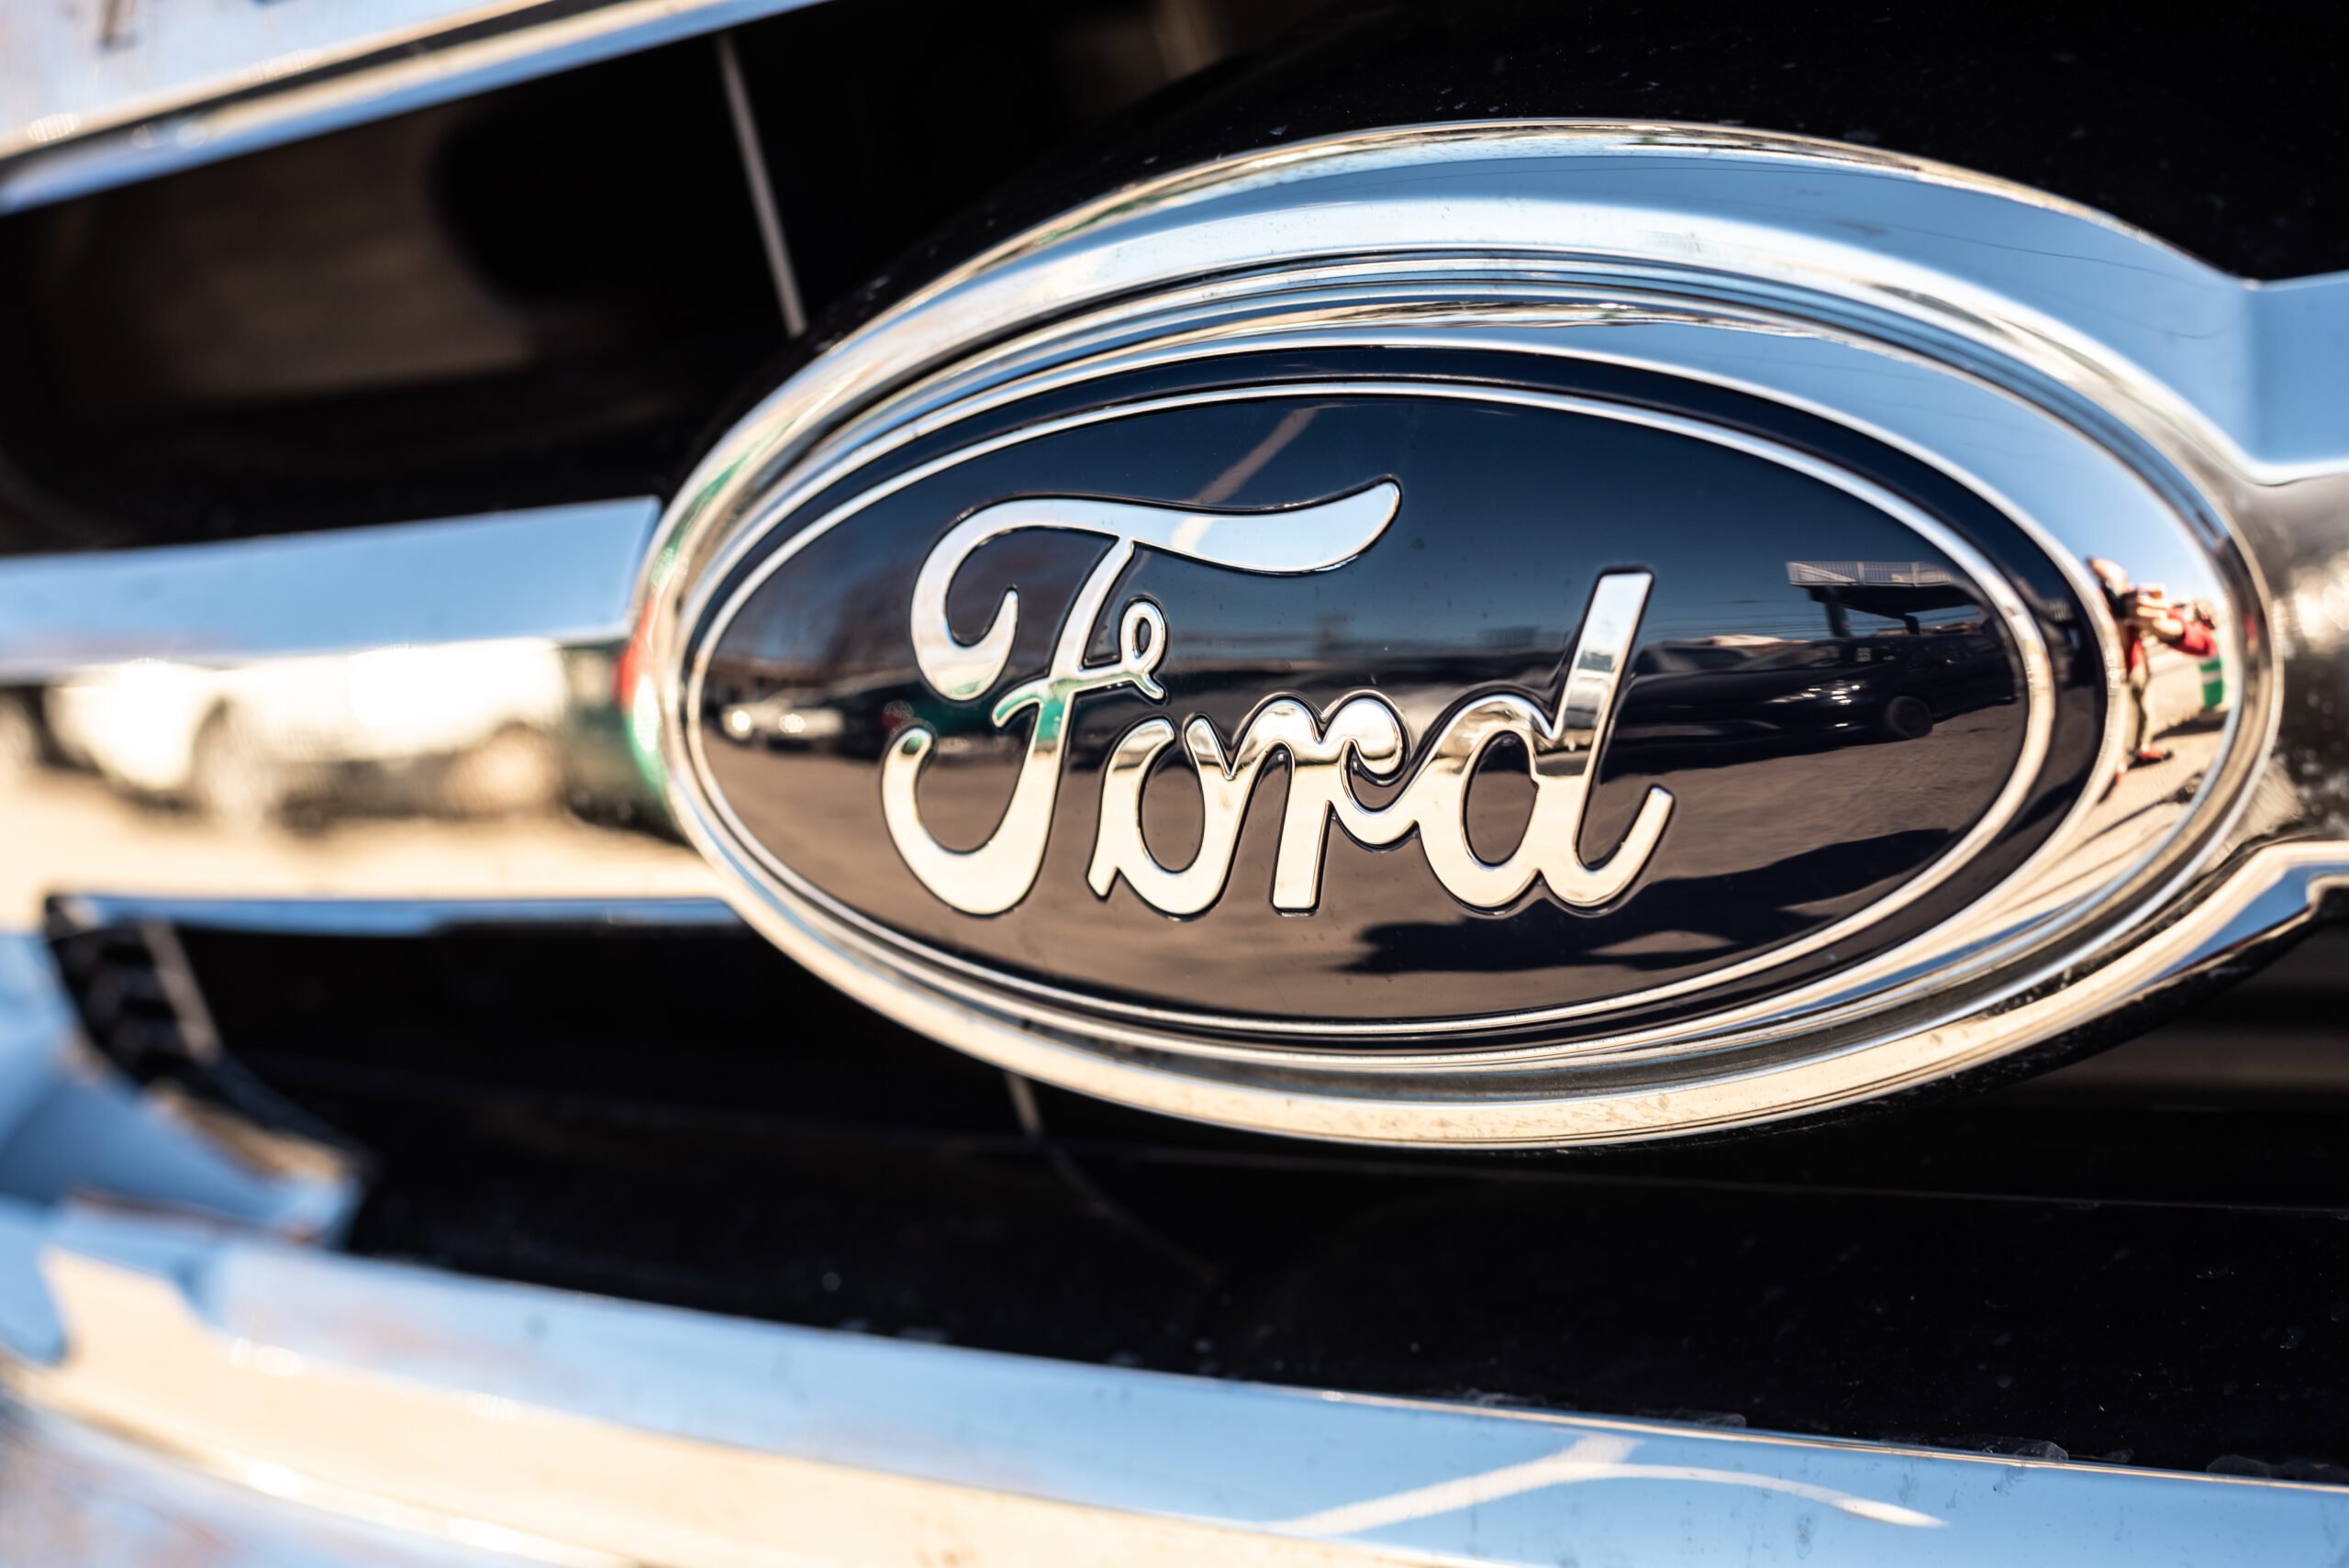 A proposed class action alleges Ford “knowingly sold approximately 3 million vehicles containing a safety defect.